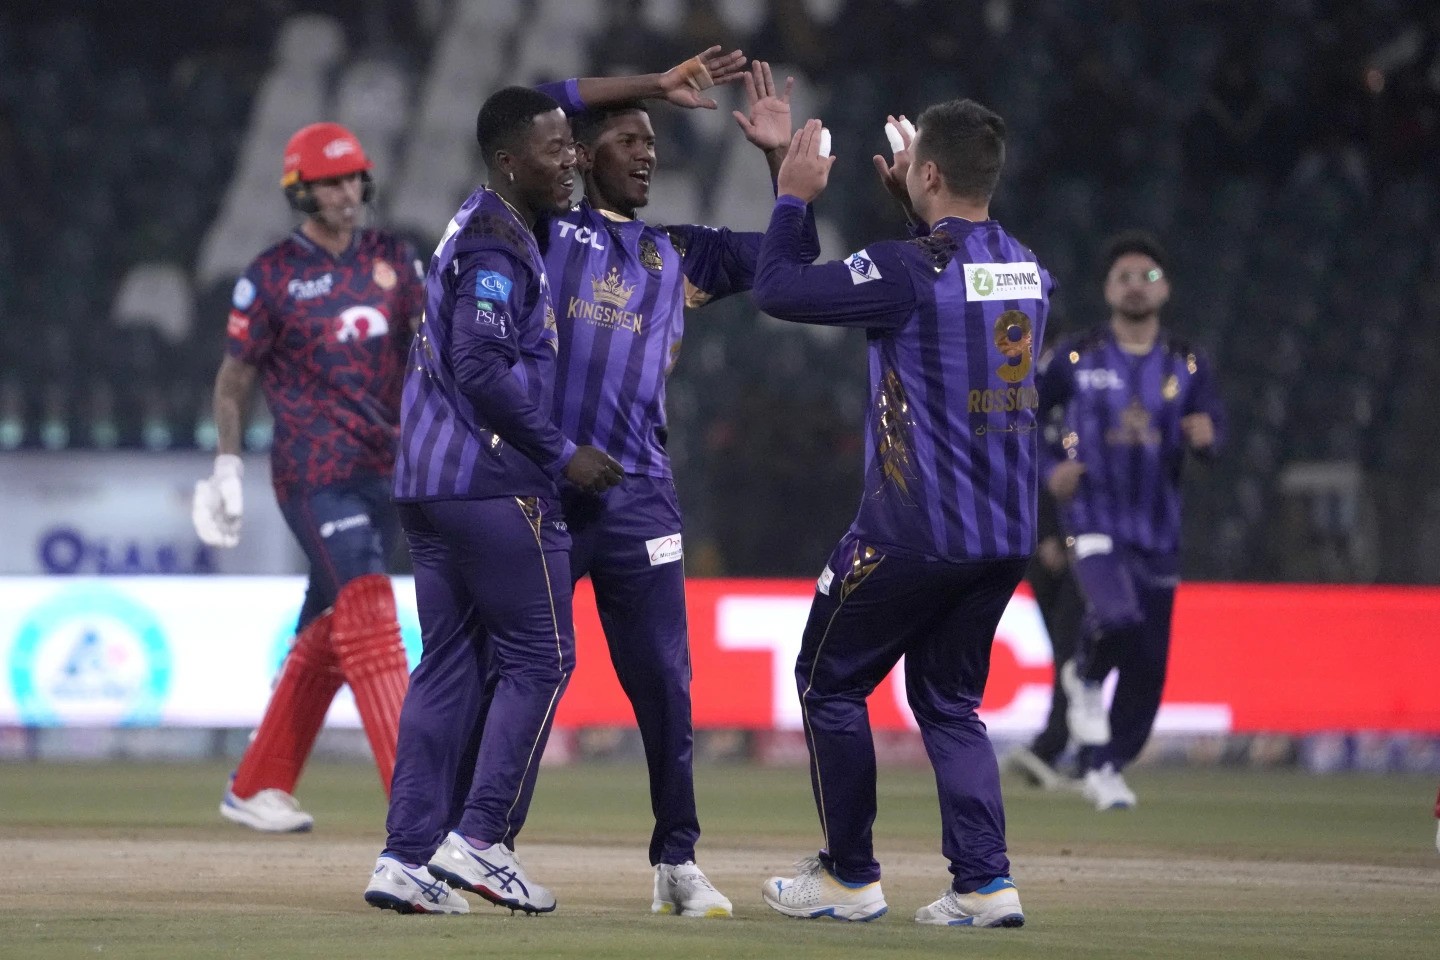 Quetta Gladiators’ Akeal Hosein, third left, celebrates with teammates after taking the wicket of Islamabad United’ Alex Hales during the Pakistan Super League T20 cricket match between Islamabad United and Quetta Gladiators, in Lahore, Pakistan Thursday, Feb. 22, 2024. (AP Photo/K.M. Chaudary)